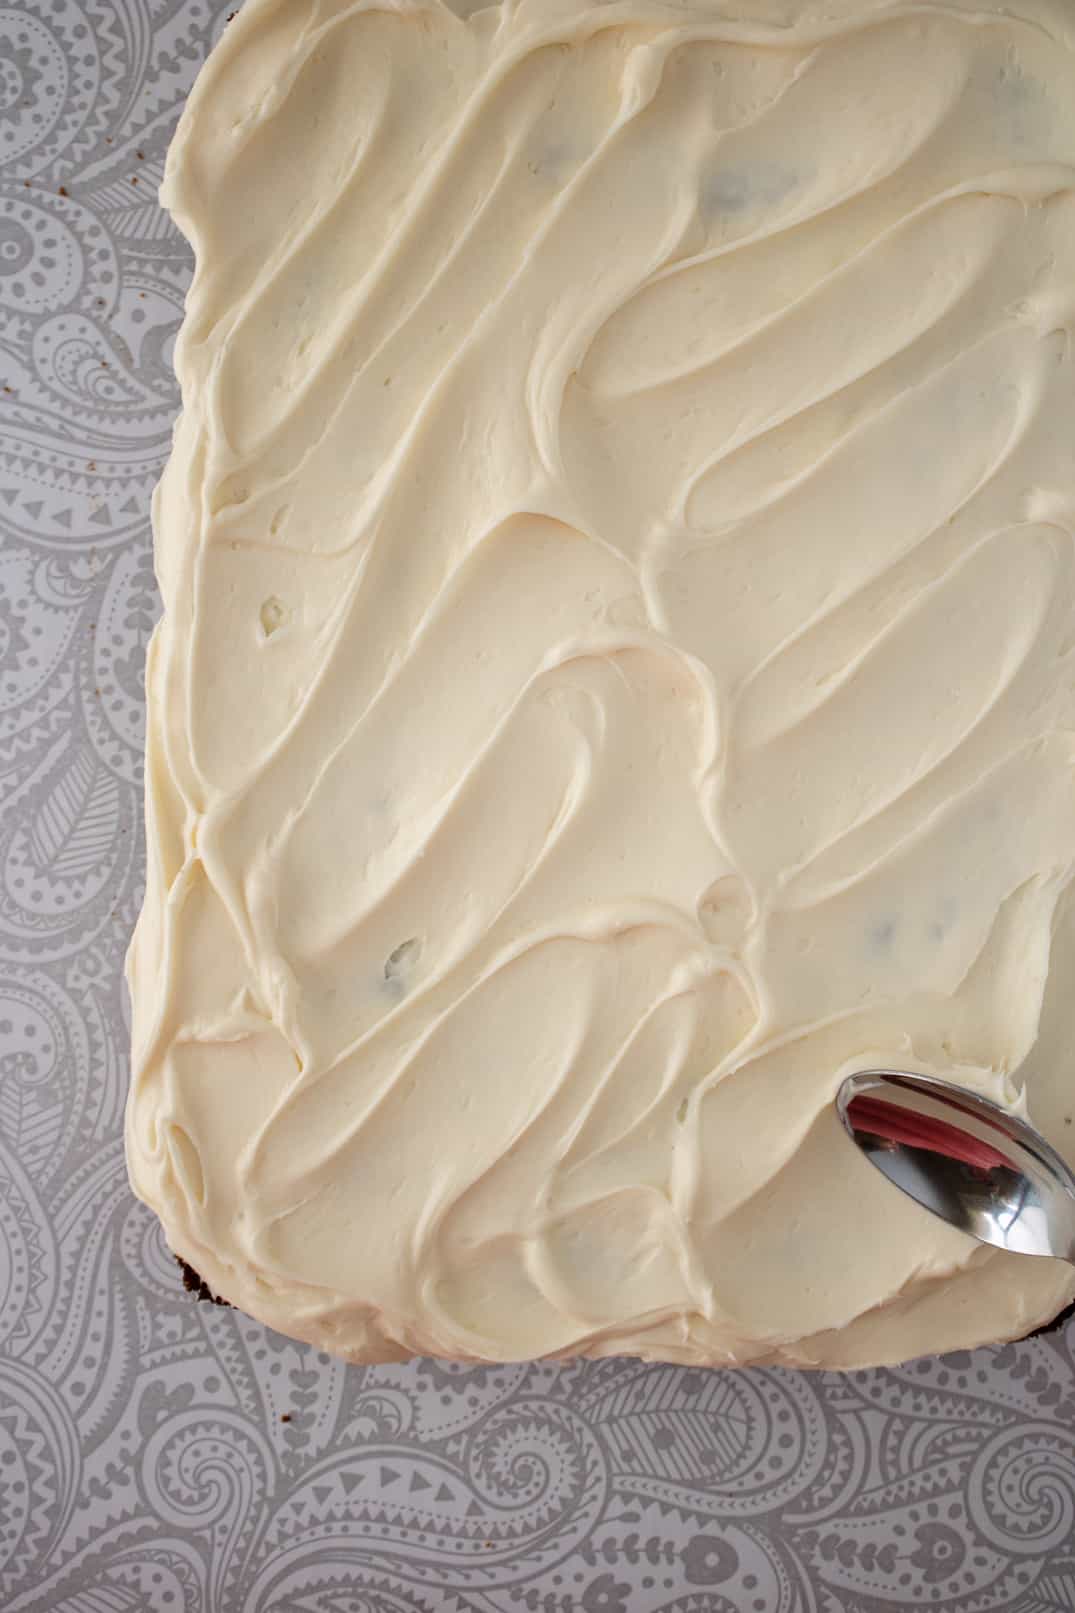 Spreading frosting on carrot cake with the back of spoon